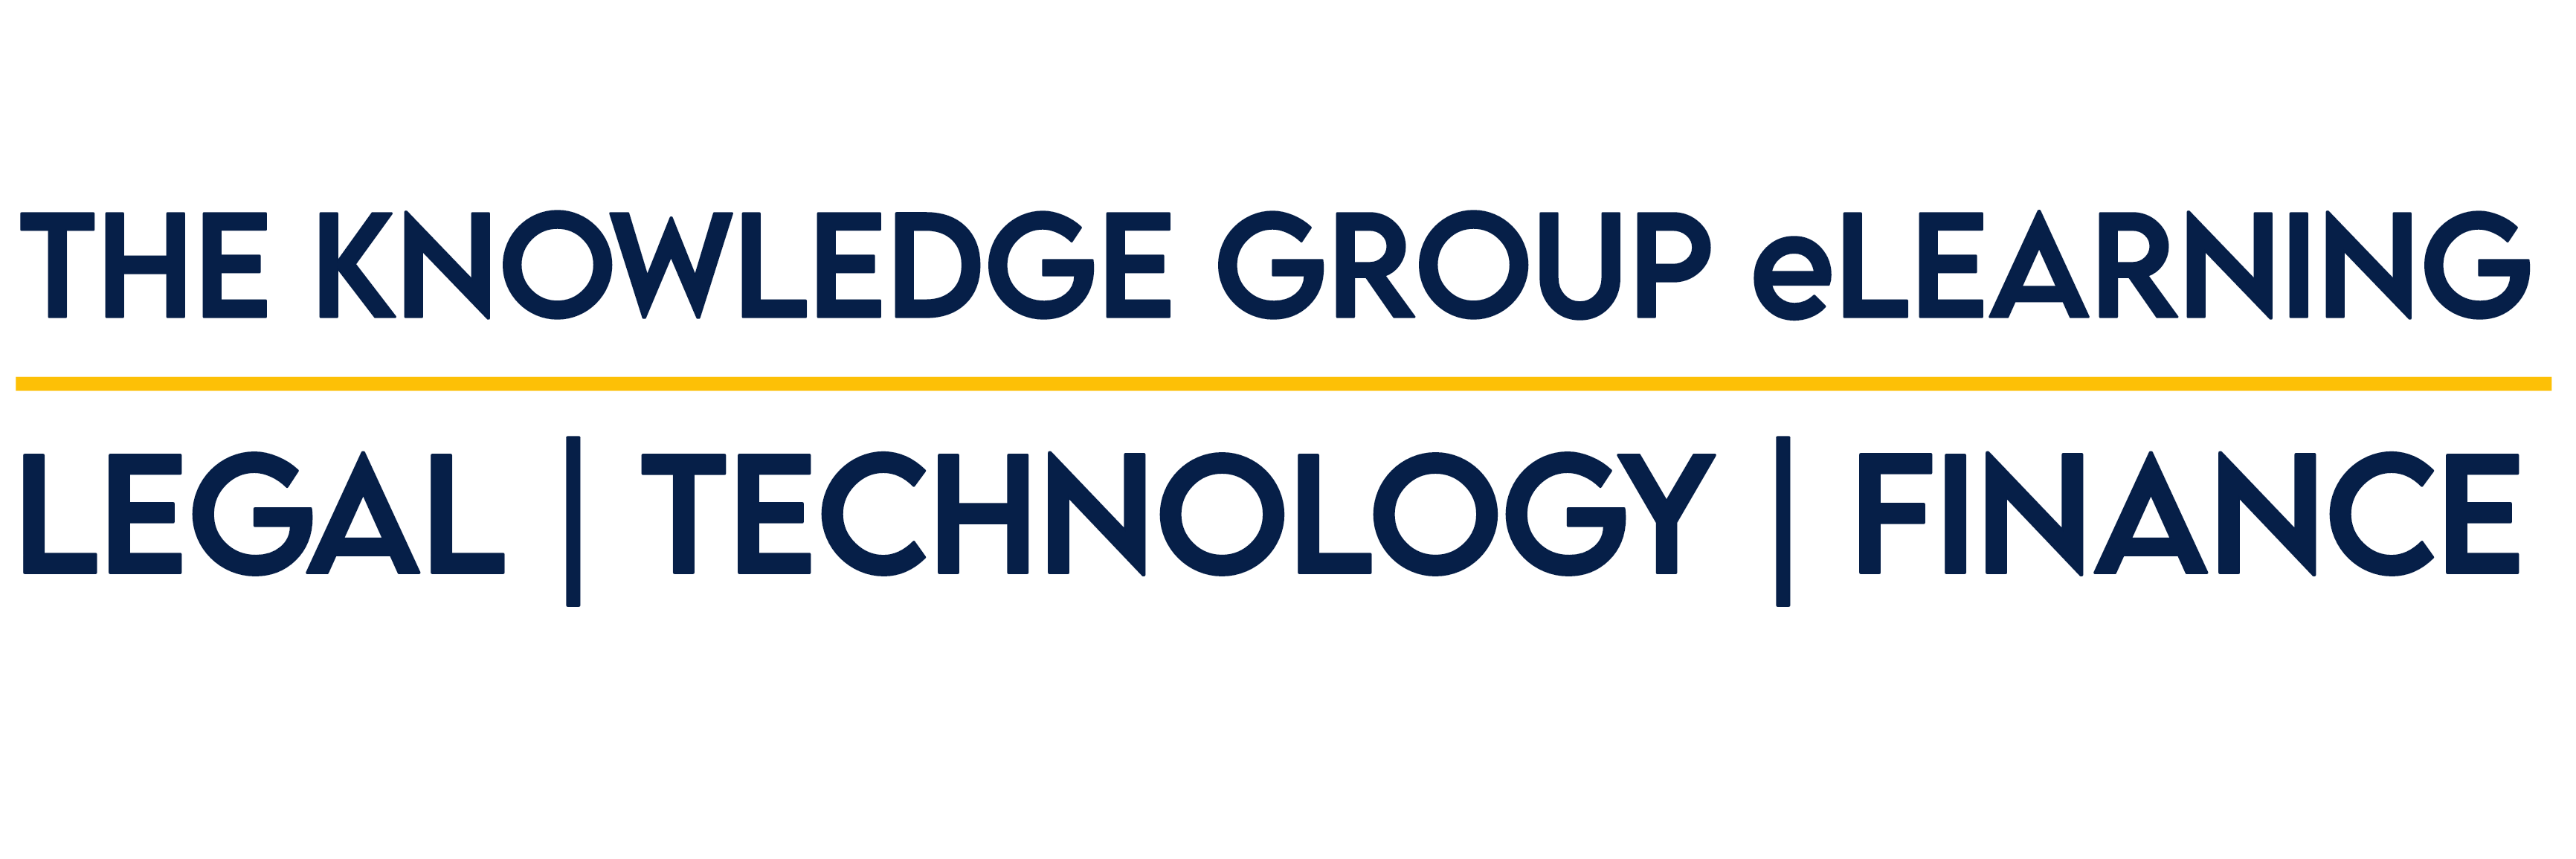 knowledge group cle cpe,cle,cpe,webcast,cle webcast,cpe webcast